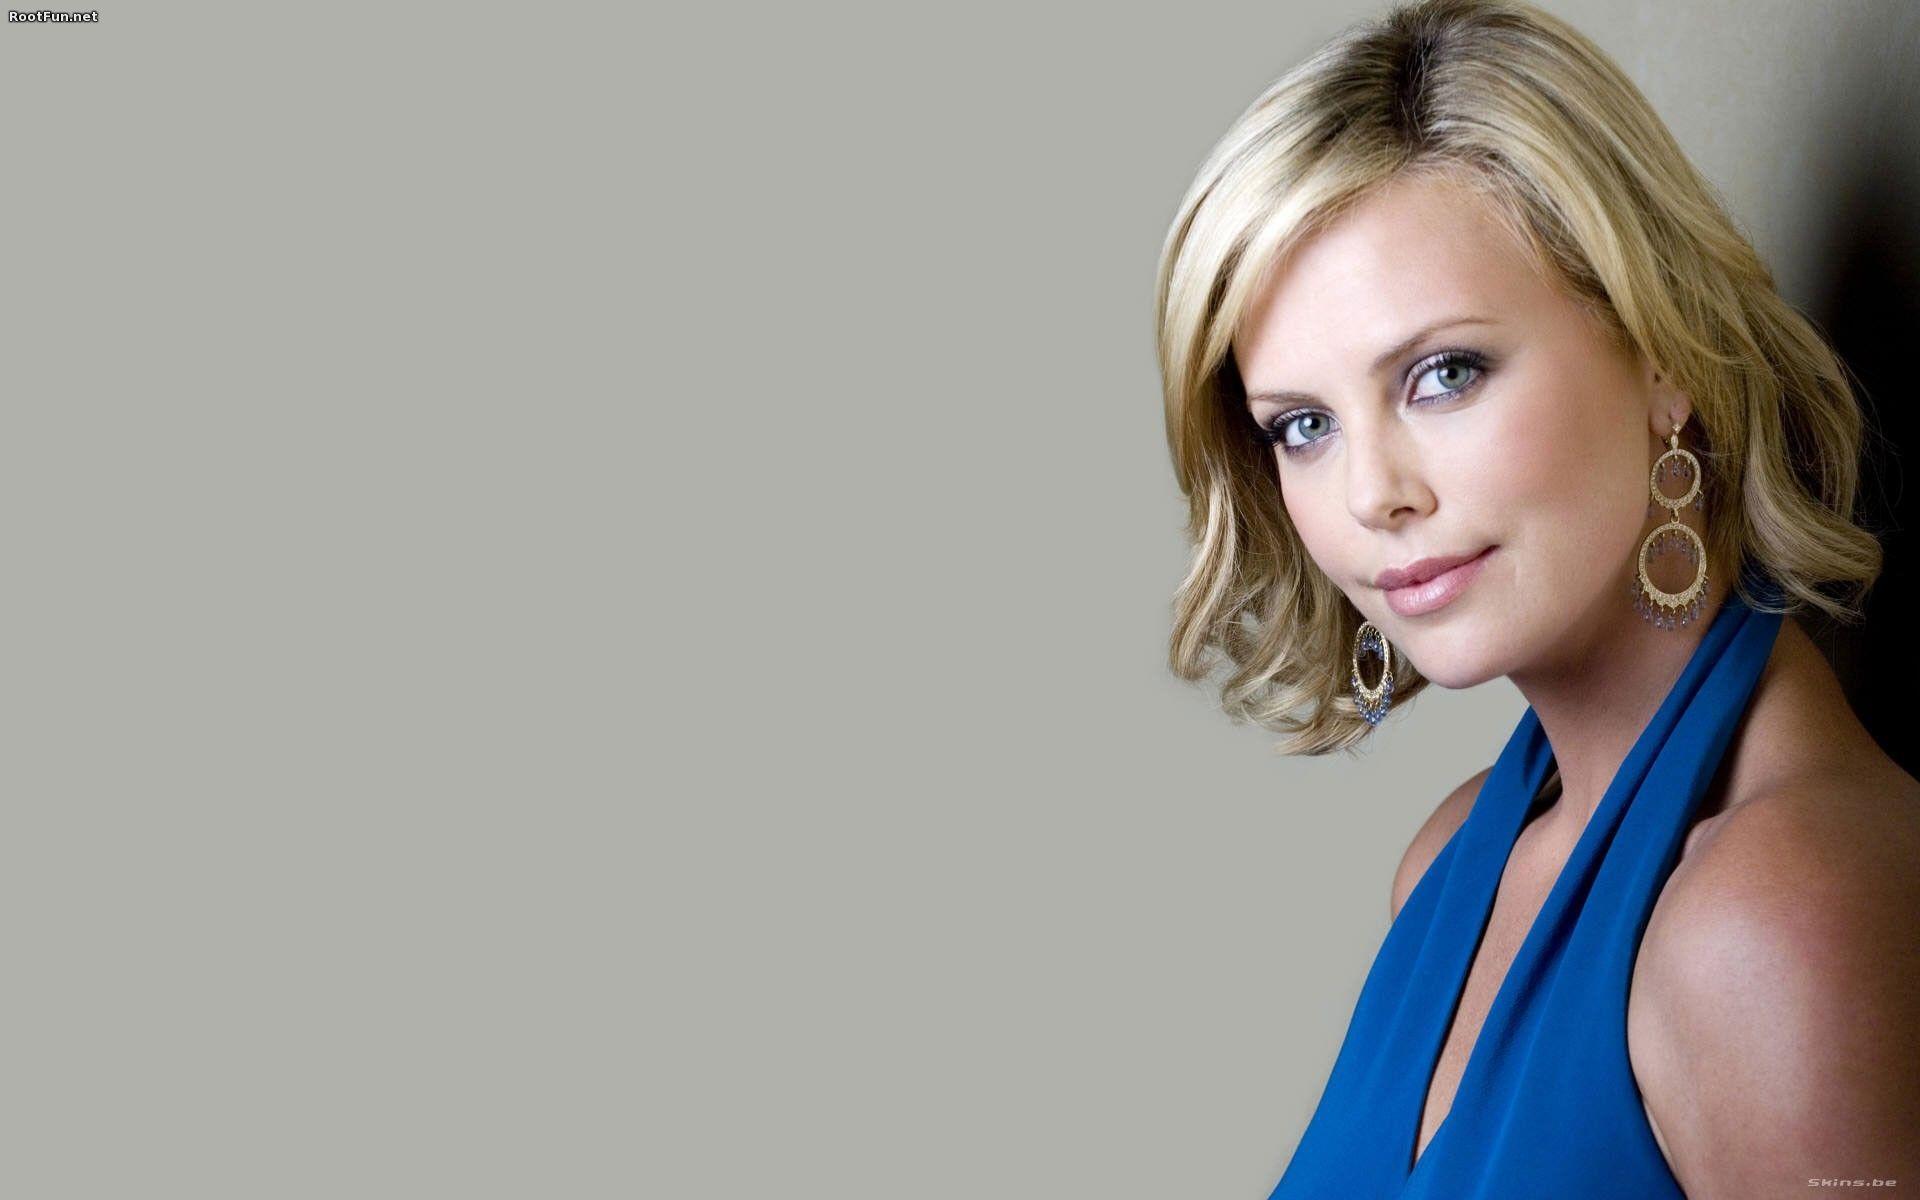 Charlize Theron Wallpaper High Resolution and Quality Download